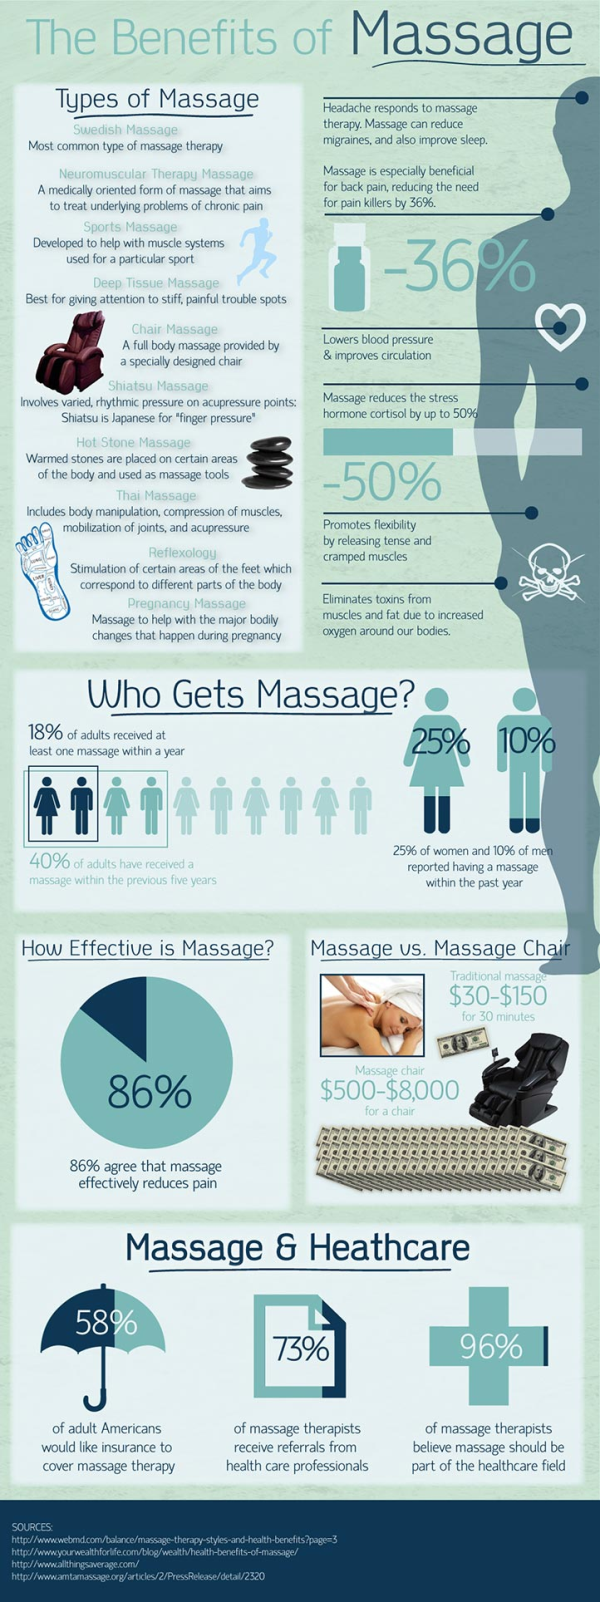 info-graphic by massage-chairs.com